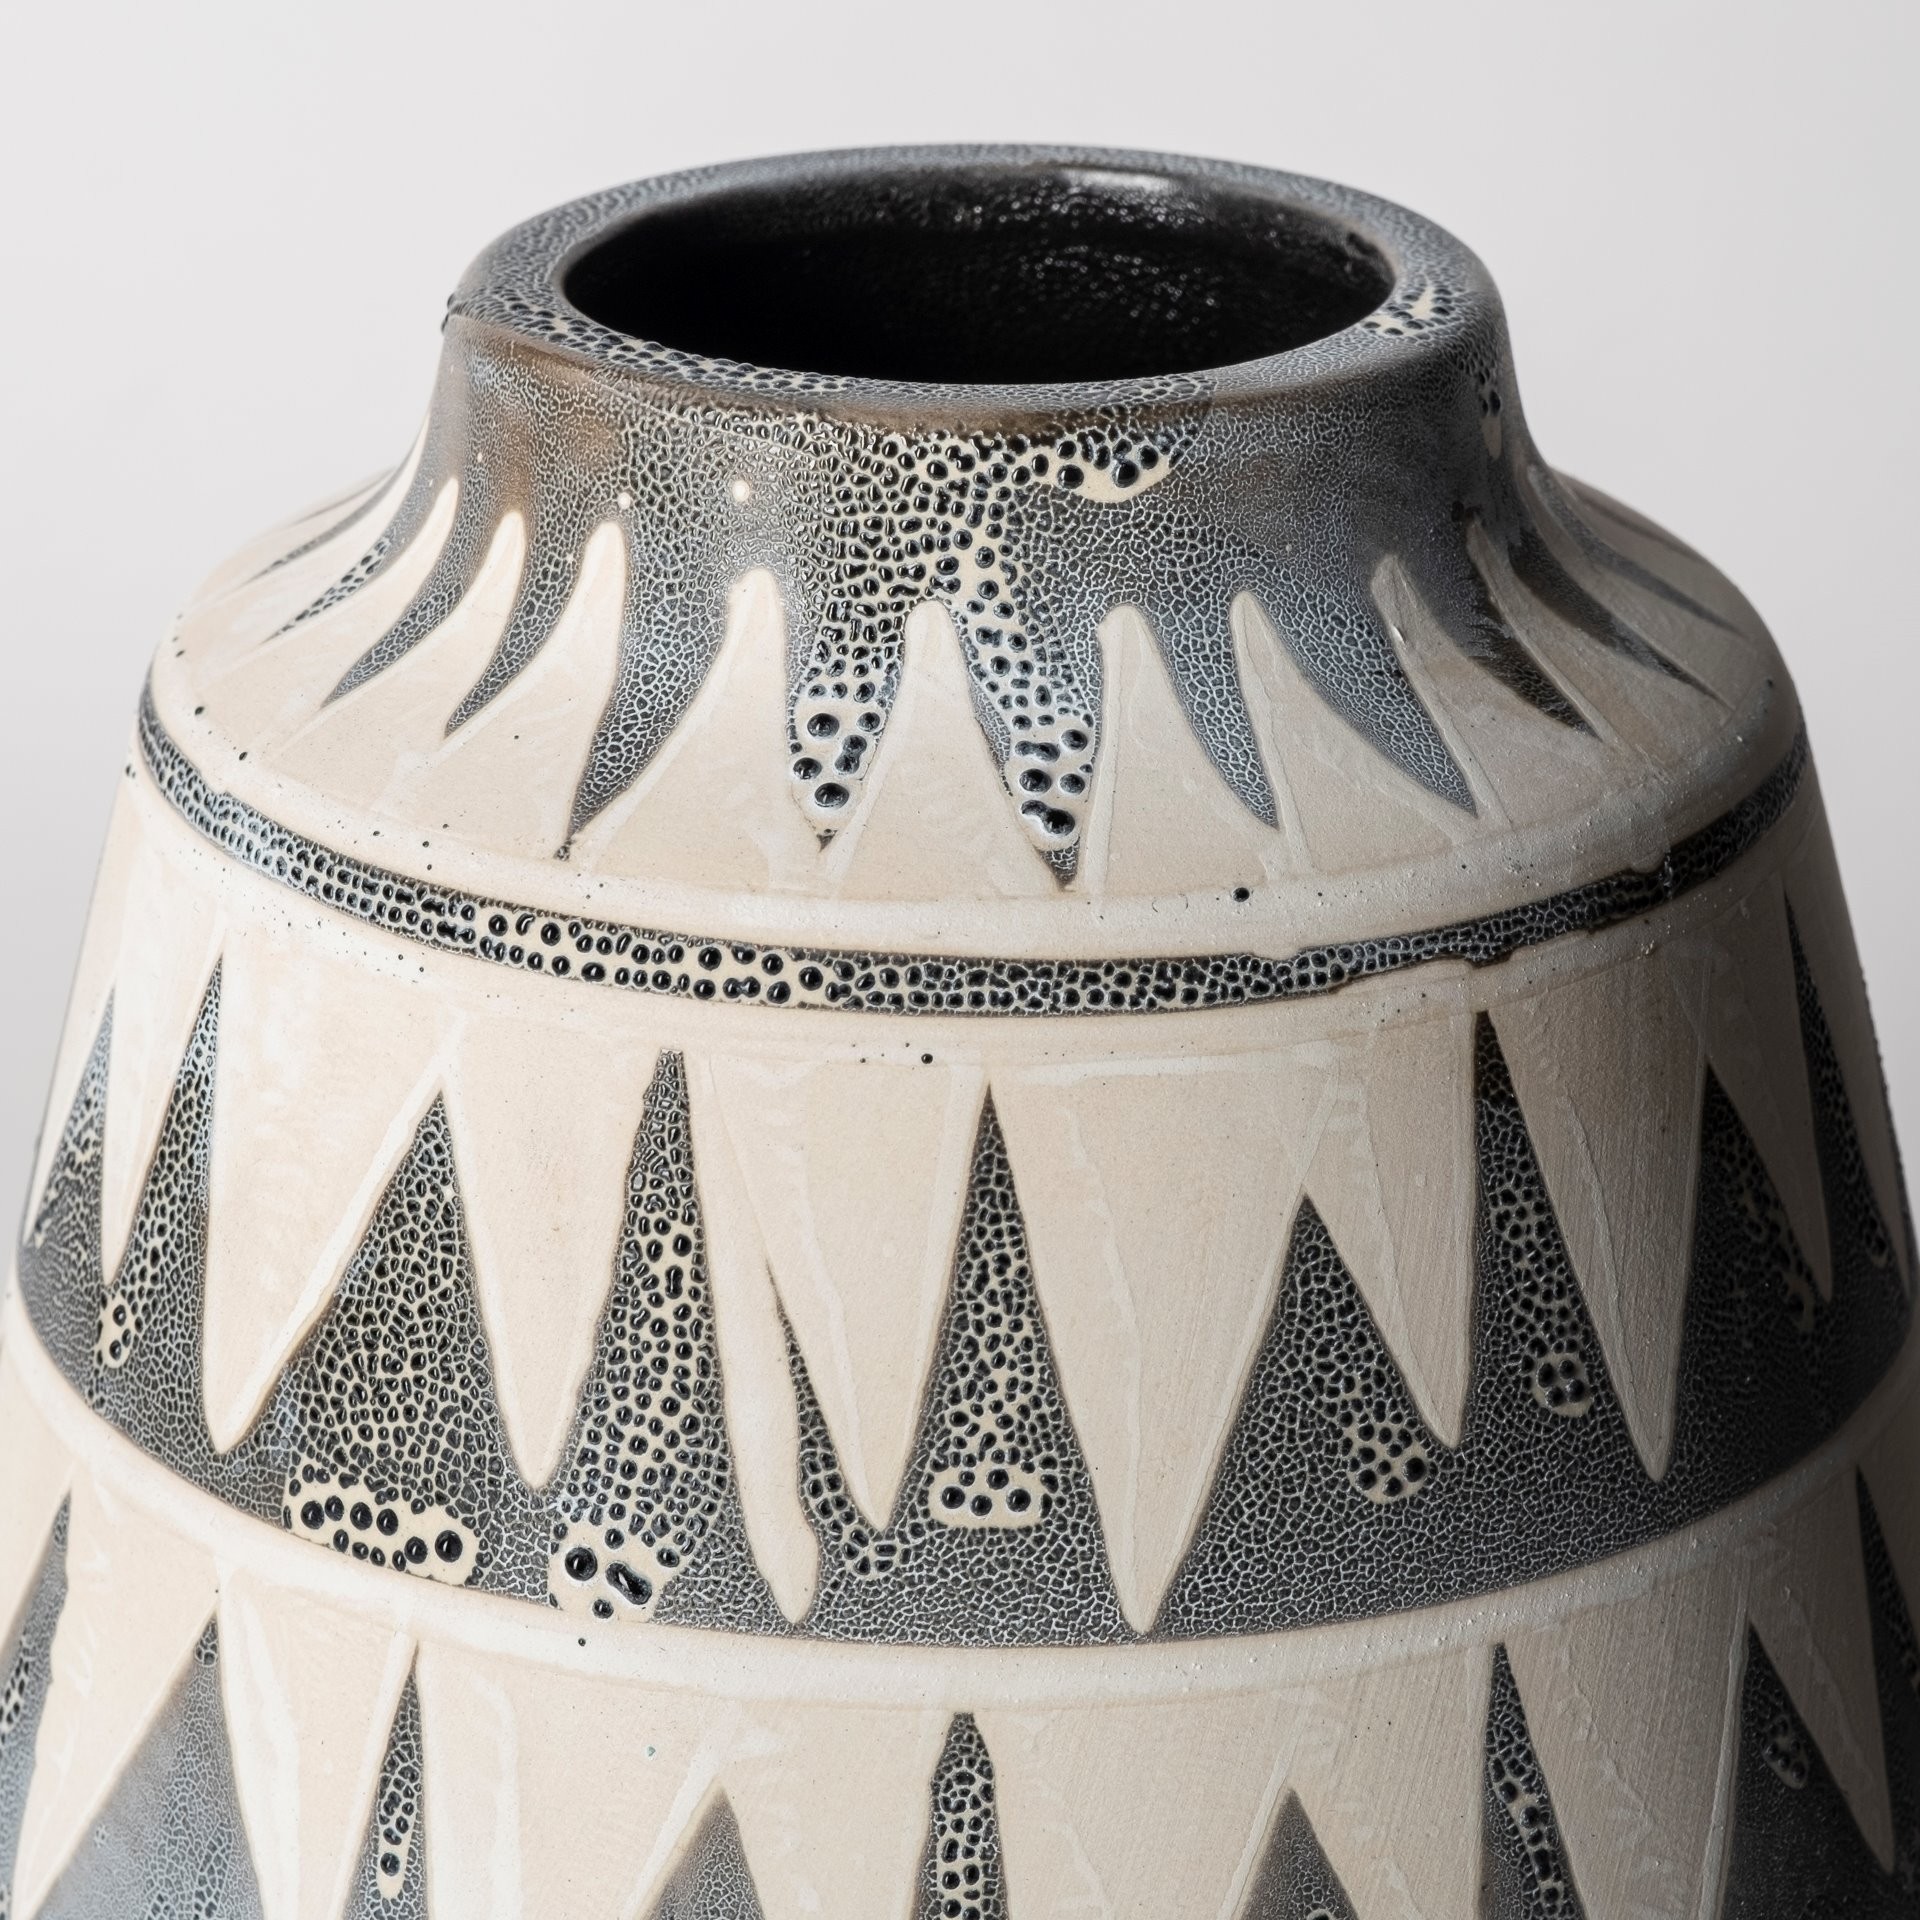 8" Gray and Ivory Triangle Pattern Ceramic Vase